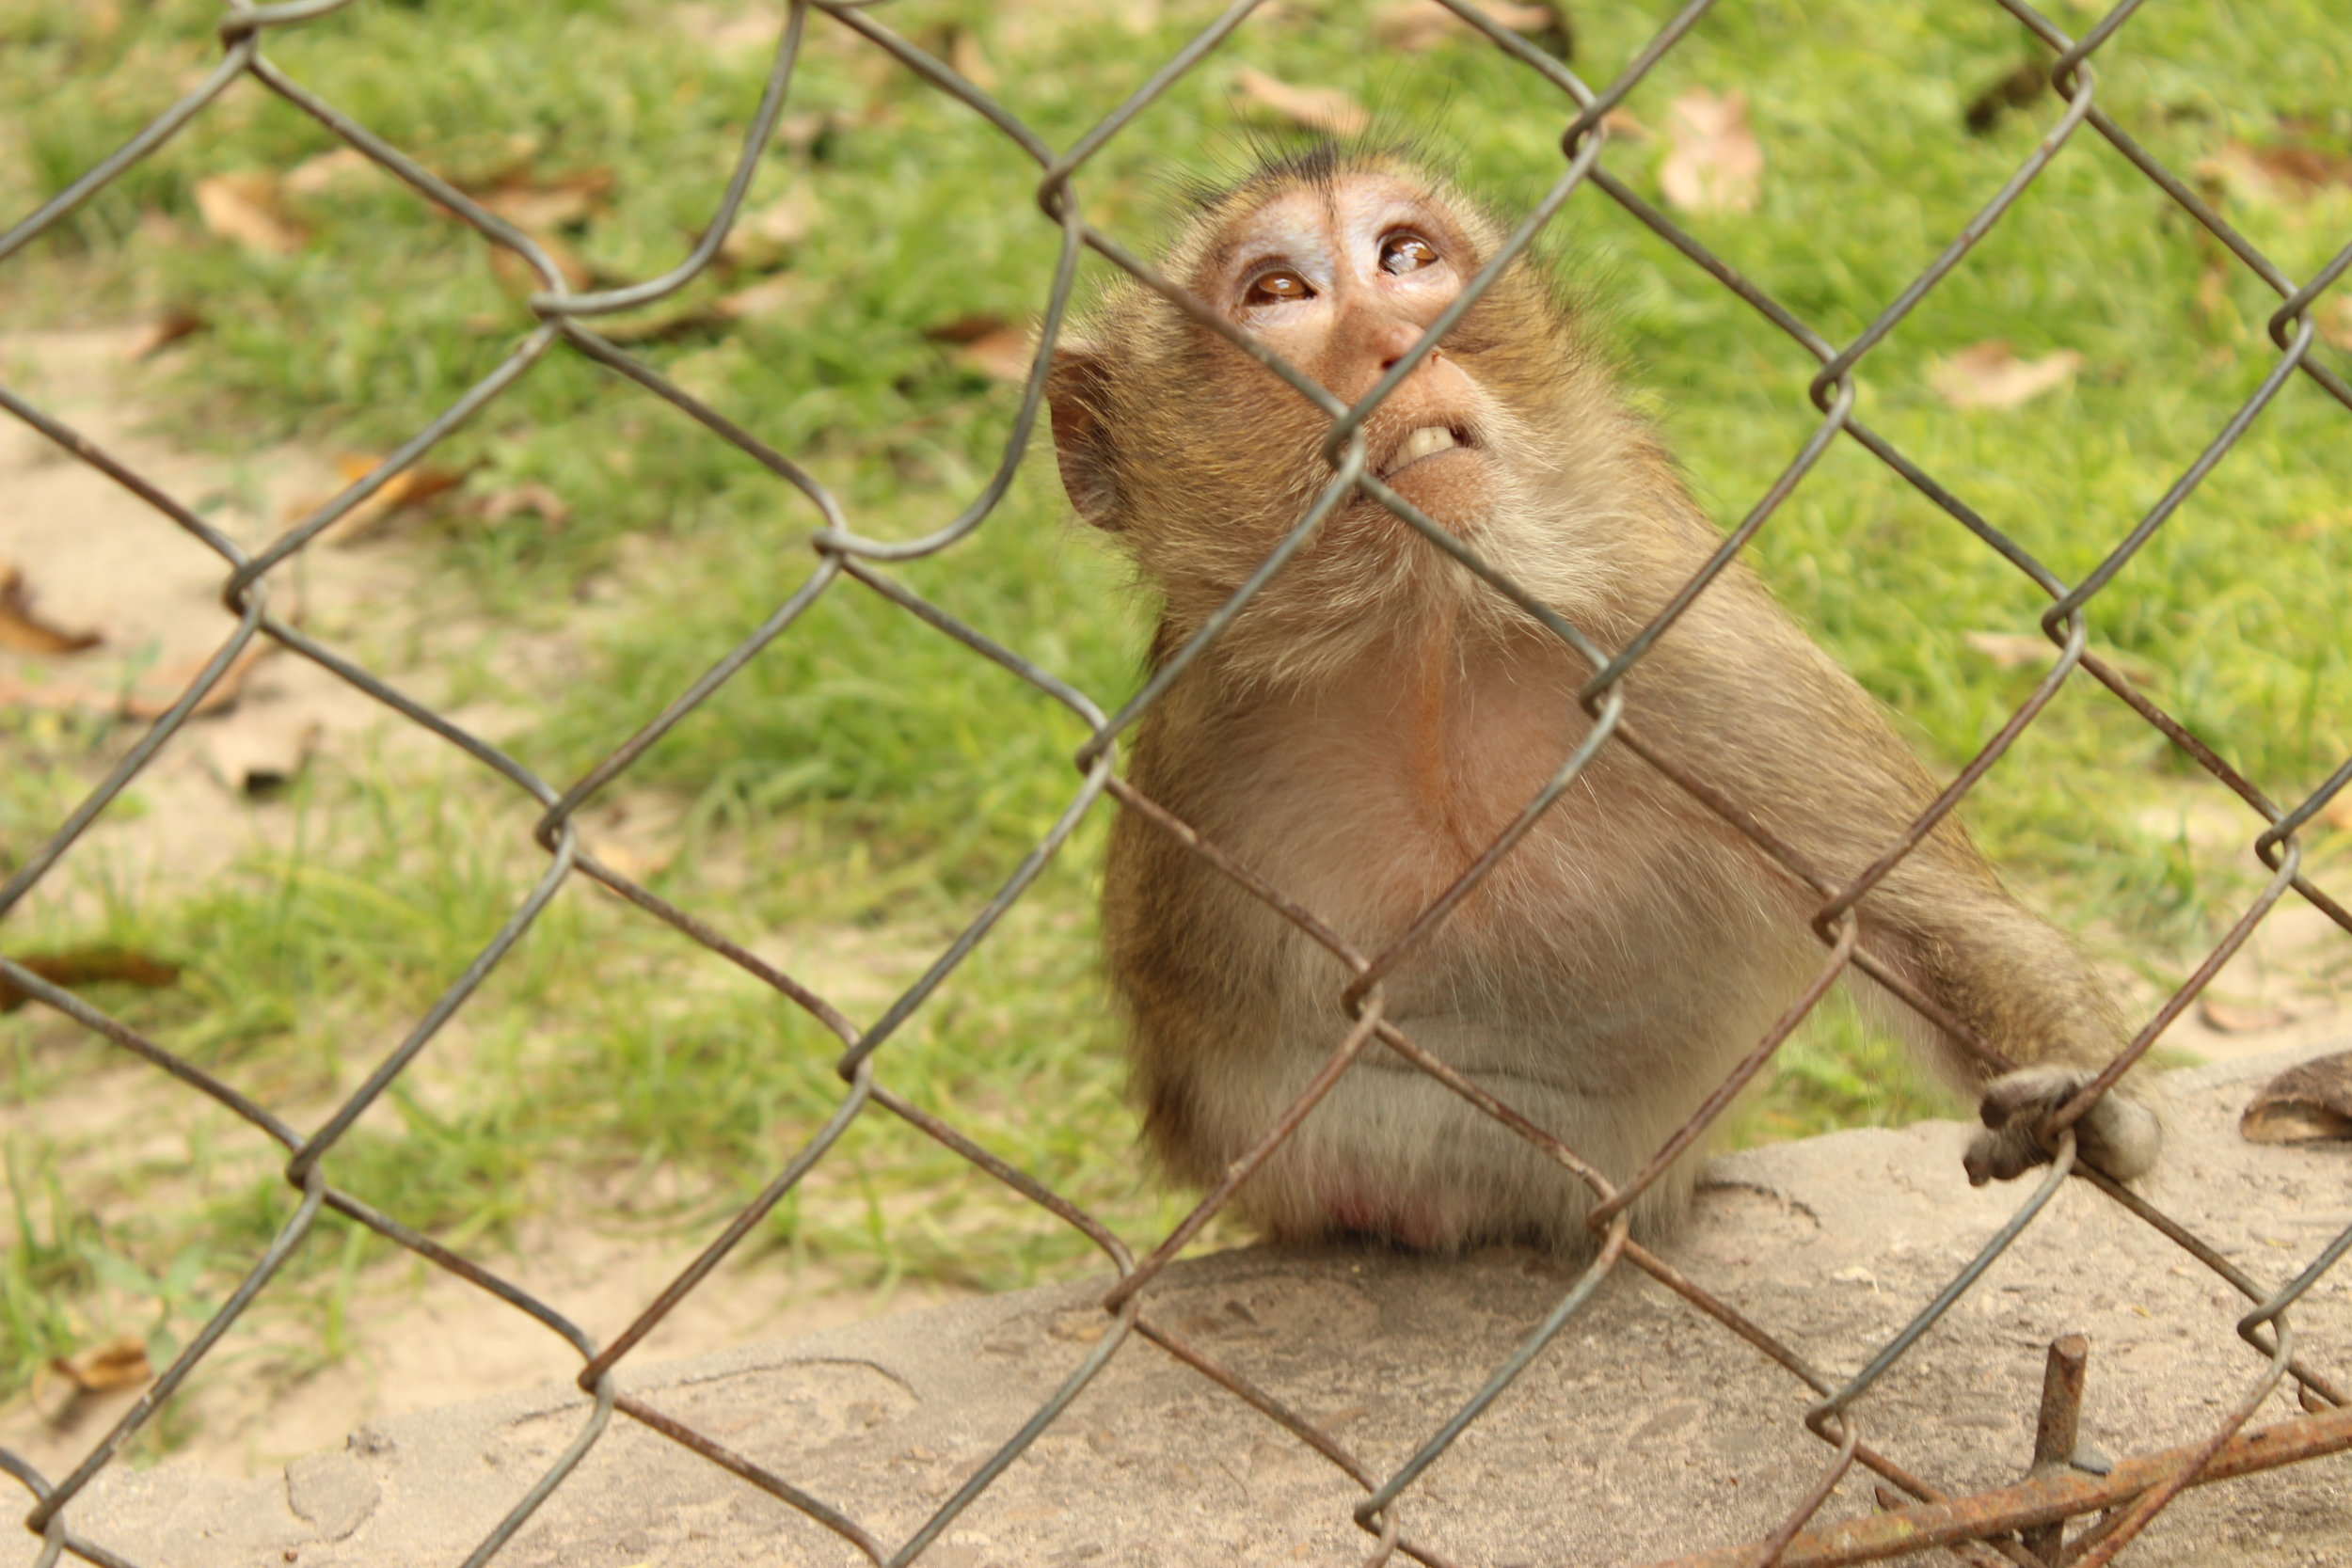  Bandit, a macaque monkey, was born without several limbs and digits but was still the head honcho of her enclosure. Macaques are often seen as pests in many parts of Thailand where they’ve learned to adapt and take advantage of urban development. 